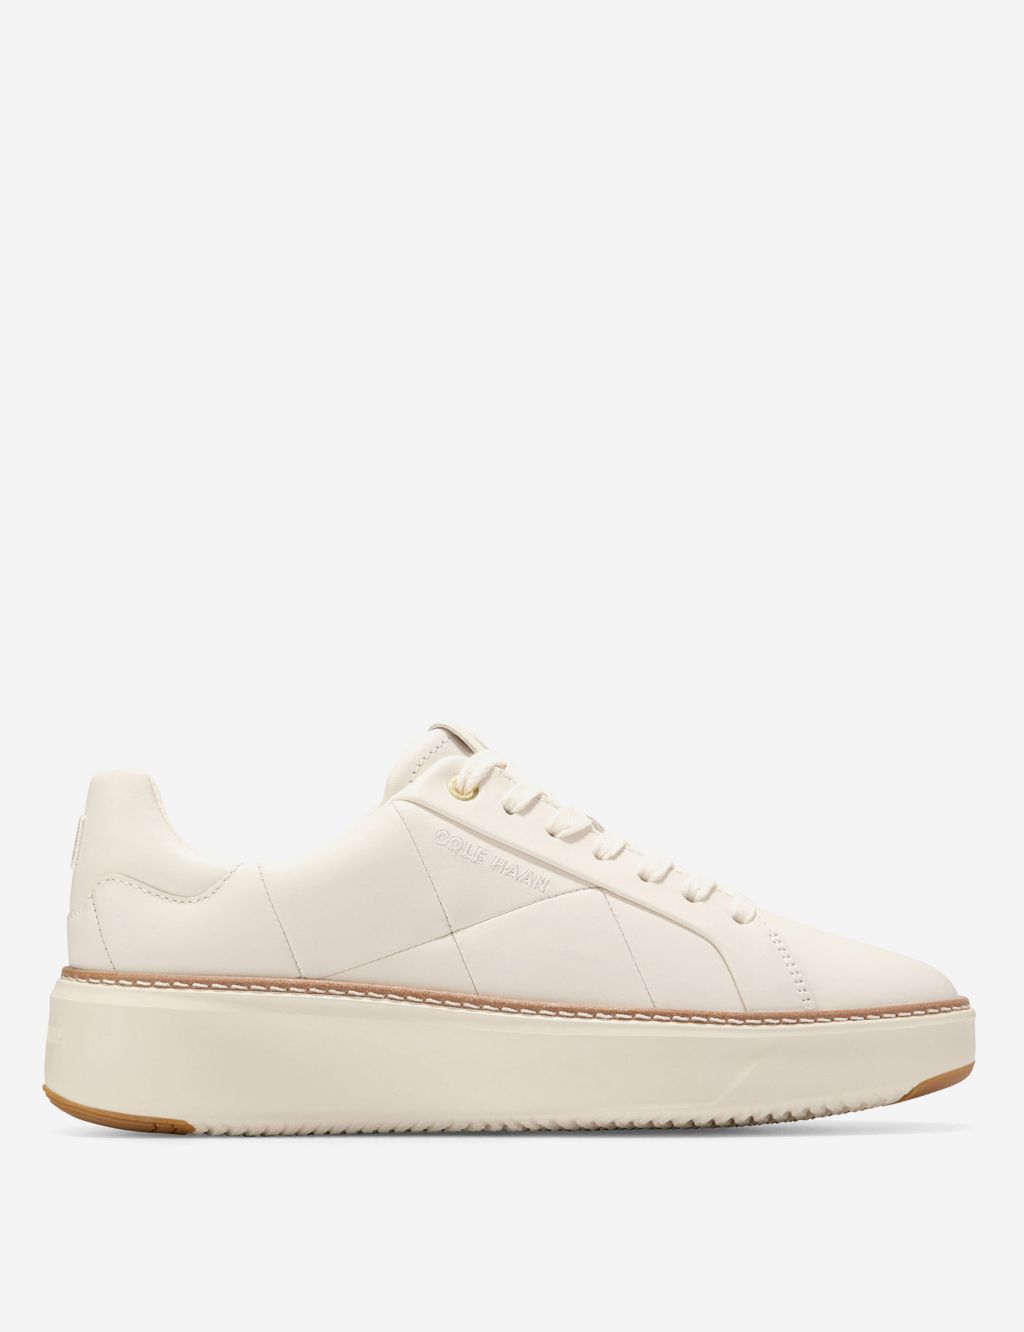 GrandPro Topspin Leather Flatform Trainers | Cole Haan | M&S